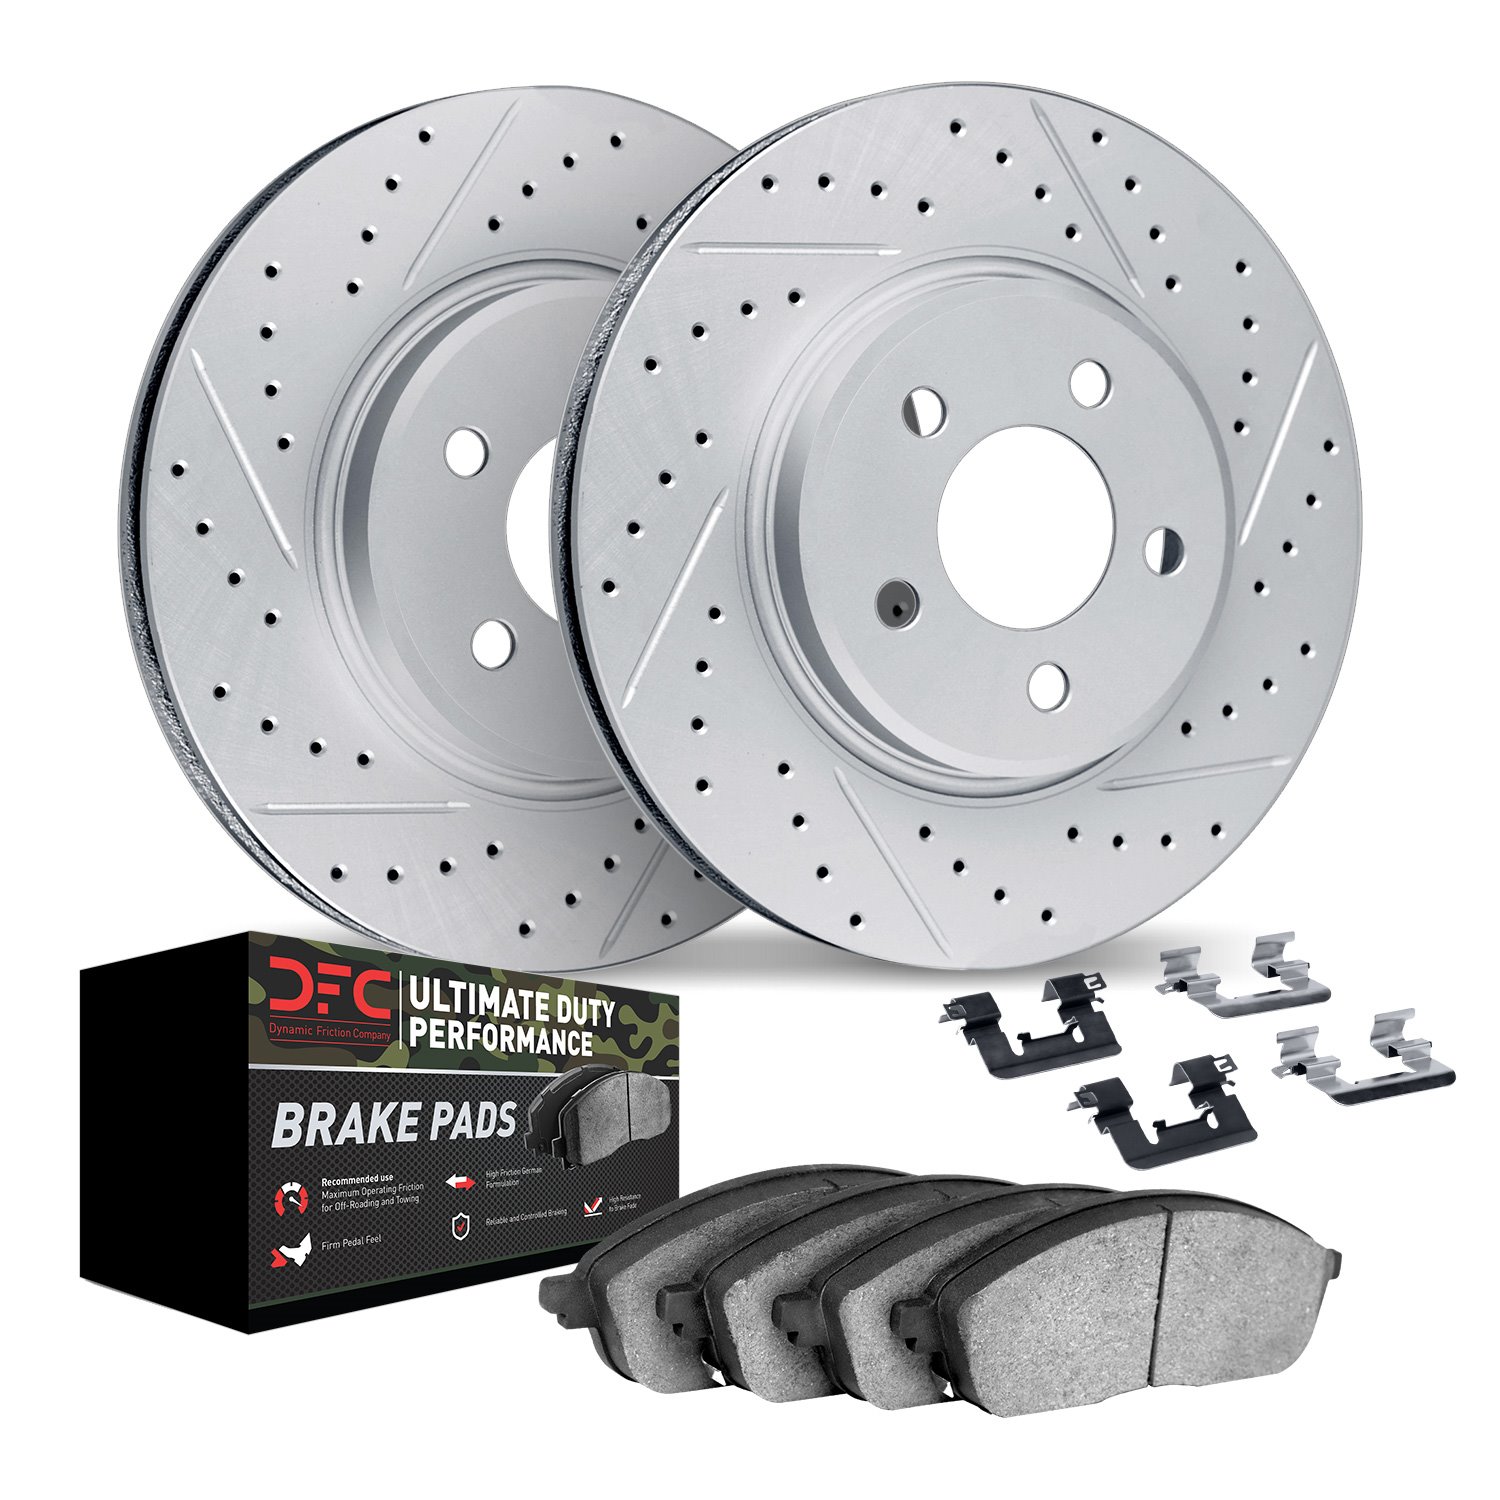 2412-47002 Geoperformance Drilled/Slotted Brake Rotors with Ultimate-Duty Brake Pads Kit & Hardware, 1990-1993 GM, Position: Fro